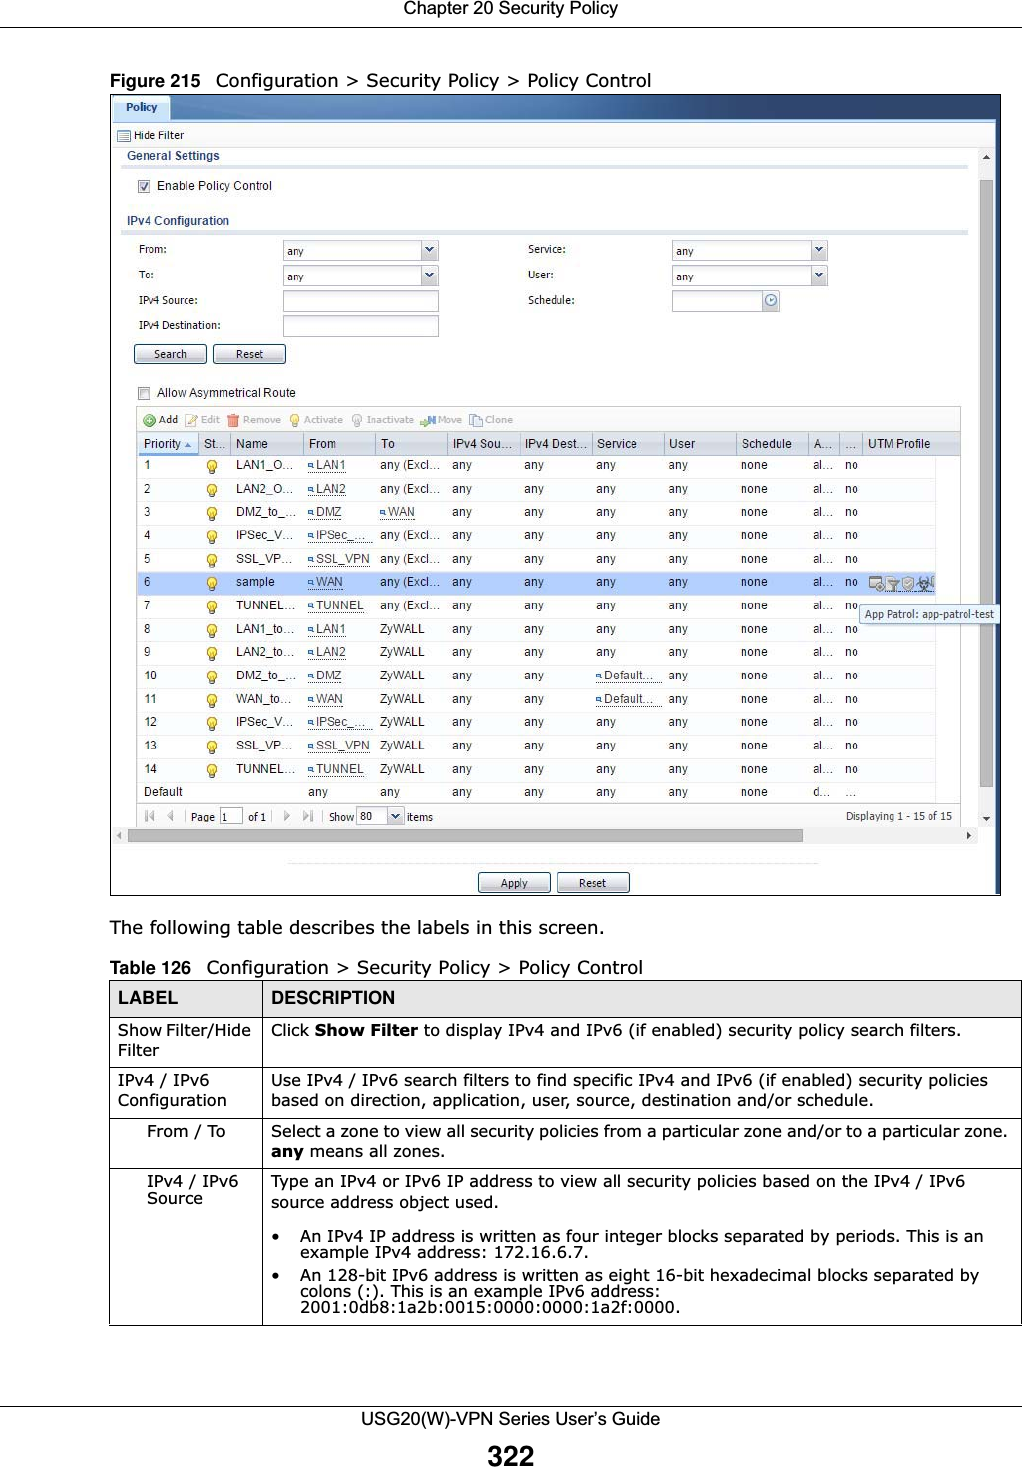 Chapter 20 Security PolicyUSG20(W)-VPN Series User’s Guide322Figure 215   Configuration &gt; Security Policy &gt; Policy Control         The following table describes the labels in this screen. Table 126   Configuration &gt; Security Policy &gt; Policy ControlLABEL DESCRIPTIONShow Filter/Hide FilterClick Show Filter to display IPv4 and IPv6 (if enabled) security policy search filters.IPv4 / IPv6 ConfigurationUse IPv4 / IPv6 search filters to find specific IPv4 and IPv6 (if enabled) security policies based on direction, application, user, source, destination and/or schedule.From / To  Select a zone to view all security policies from a particular zone and/or to a particular zone. any means all zones.IPv4 / IPv6 Source Type an IPv4 or IPv6 IP address to view all security policies based on the IPv4 / IPv6 source address object used. • An IPv4 IP address is written as four integer blocks separated by periods. This is an example IPv4 address: 172.16.6.7.• An 128-bit IPv6 address is written as eight 16-bit hexadecimal blocks separated by colons (:). This is an example IPv6 address: 2001:0db8:1a2b:0015:0000:0000:1a2f:0000.